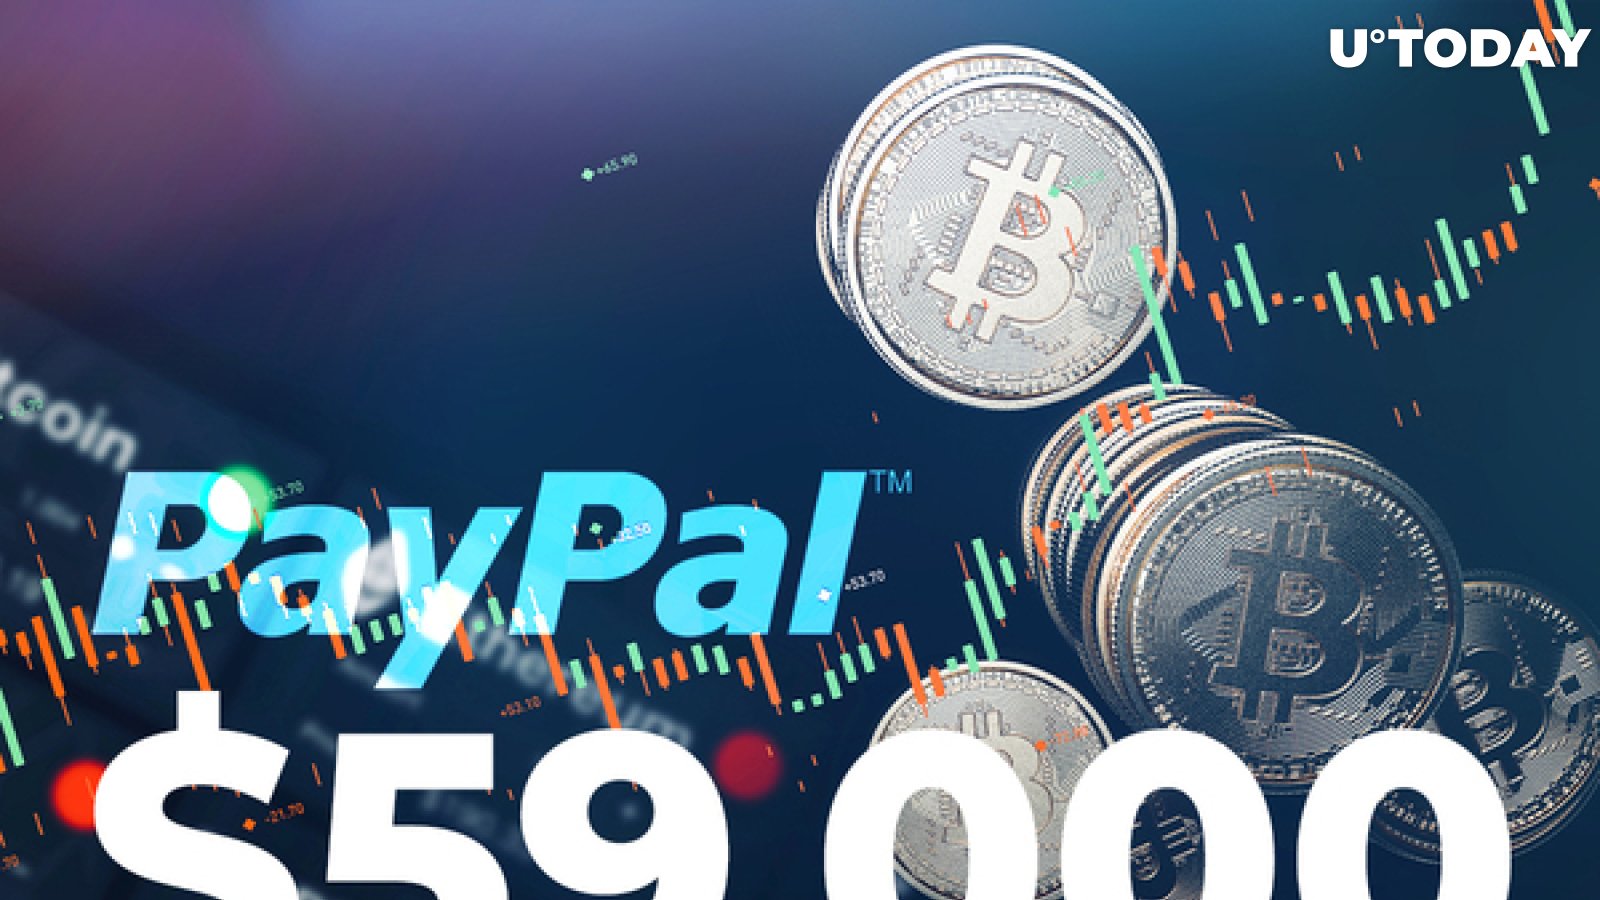 Bitcoin Surges Above $59,000 After PayPal’s Announcement